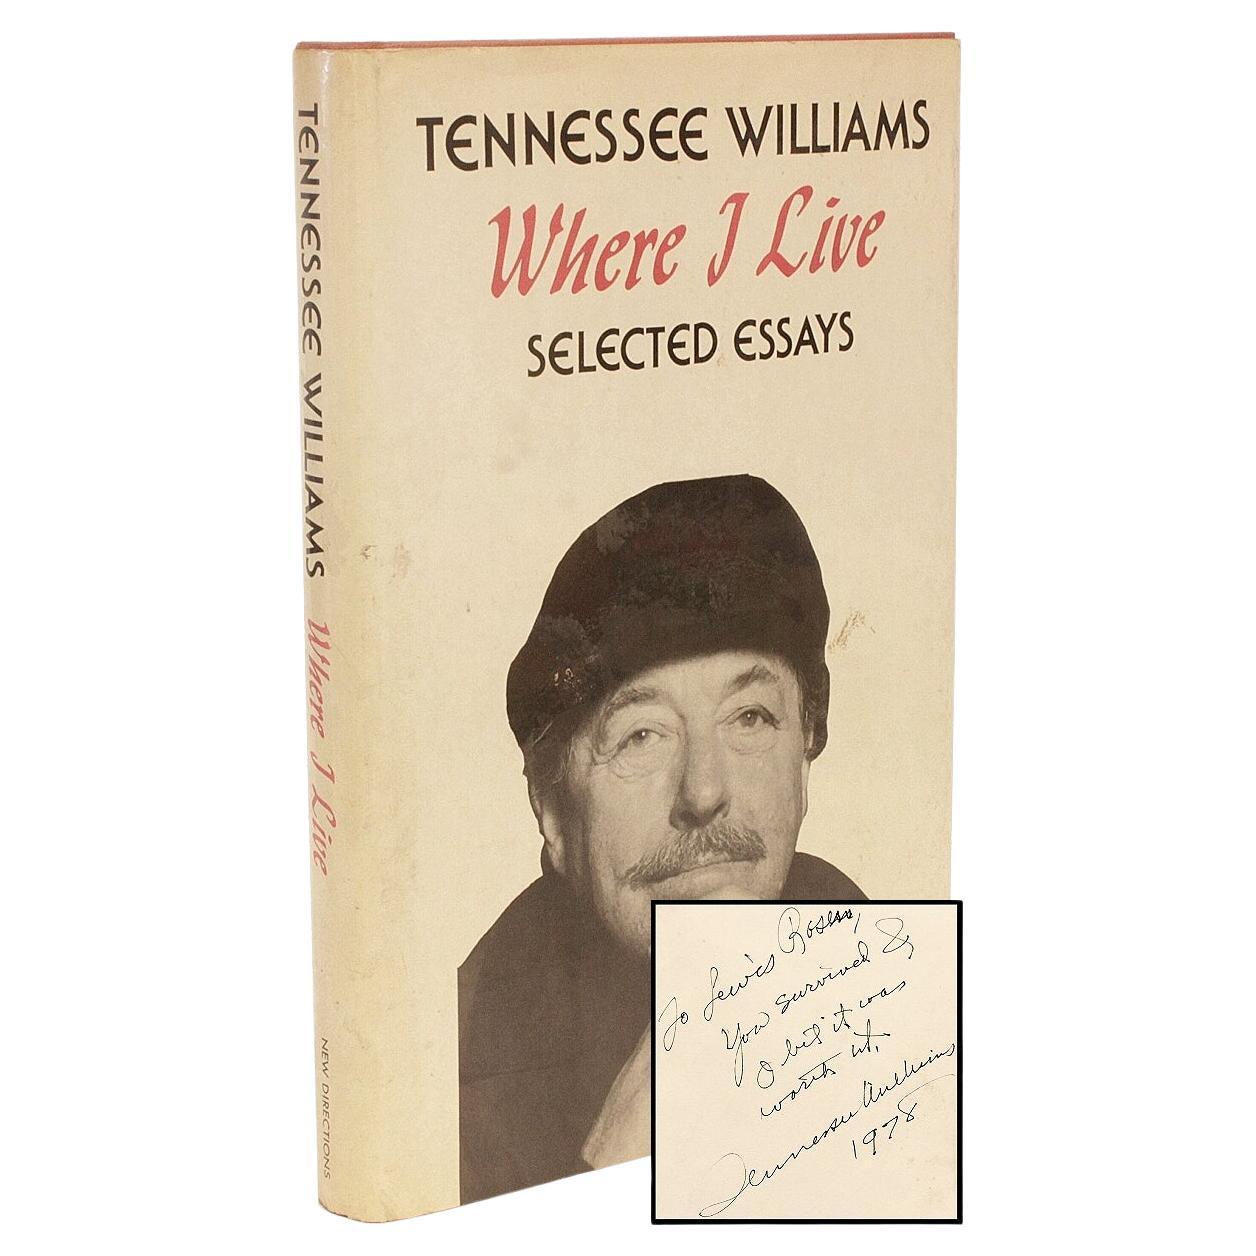 Tennessee Williams, Where I Live, First Edition, Inscribed, 1978